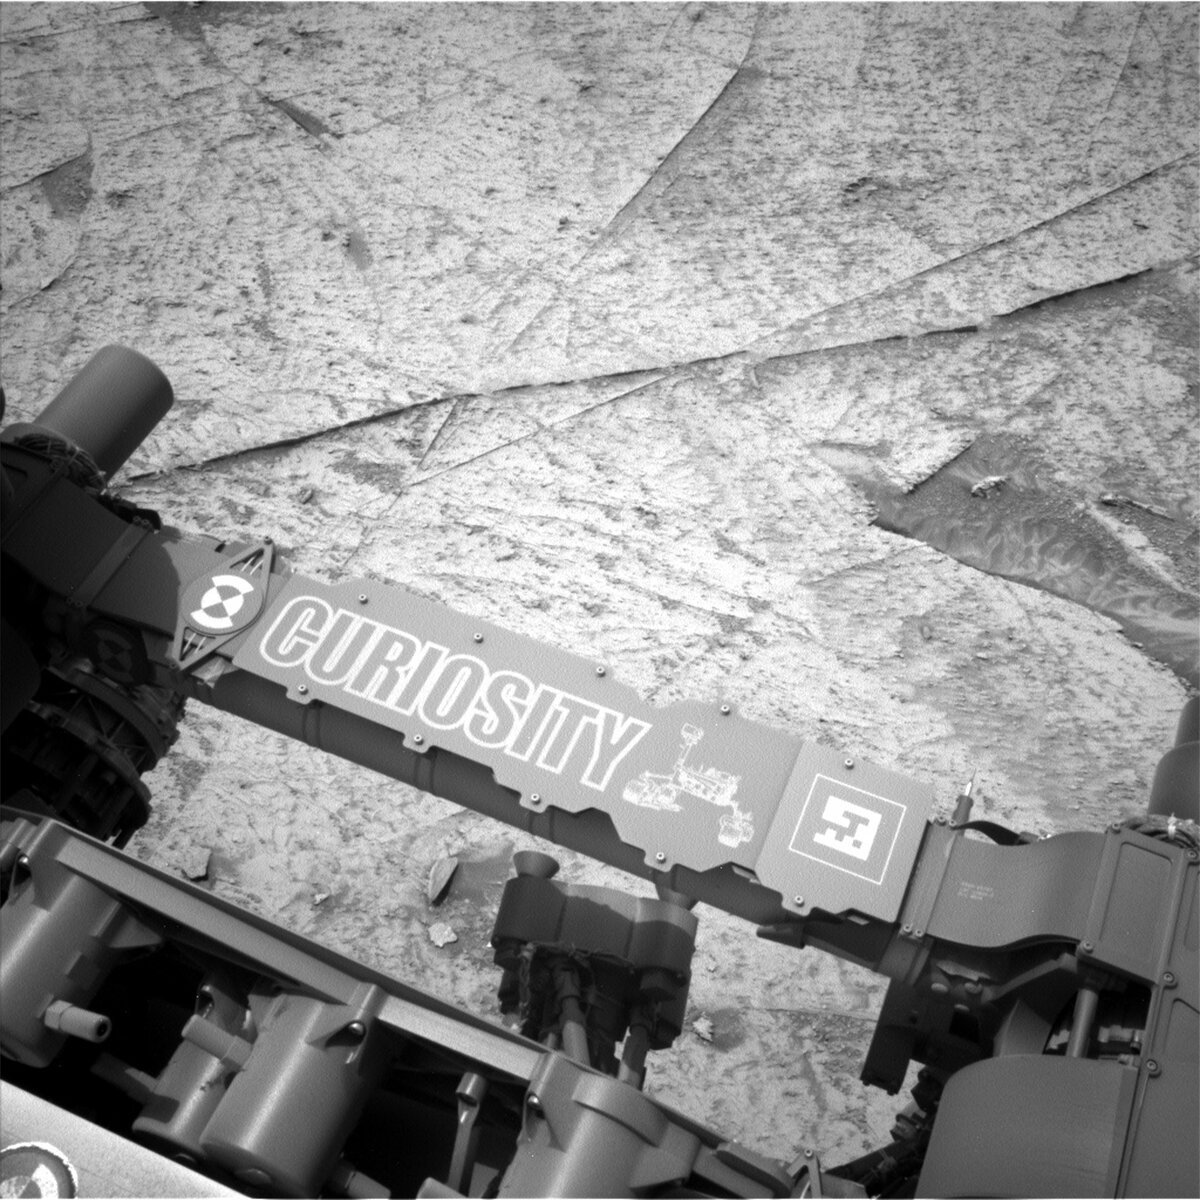 This image shows Curiosity's name plate and was taken by Left Navigation Camera onboard Curiosity on Sol 3509.